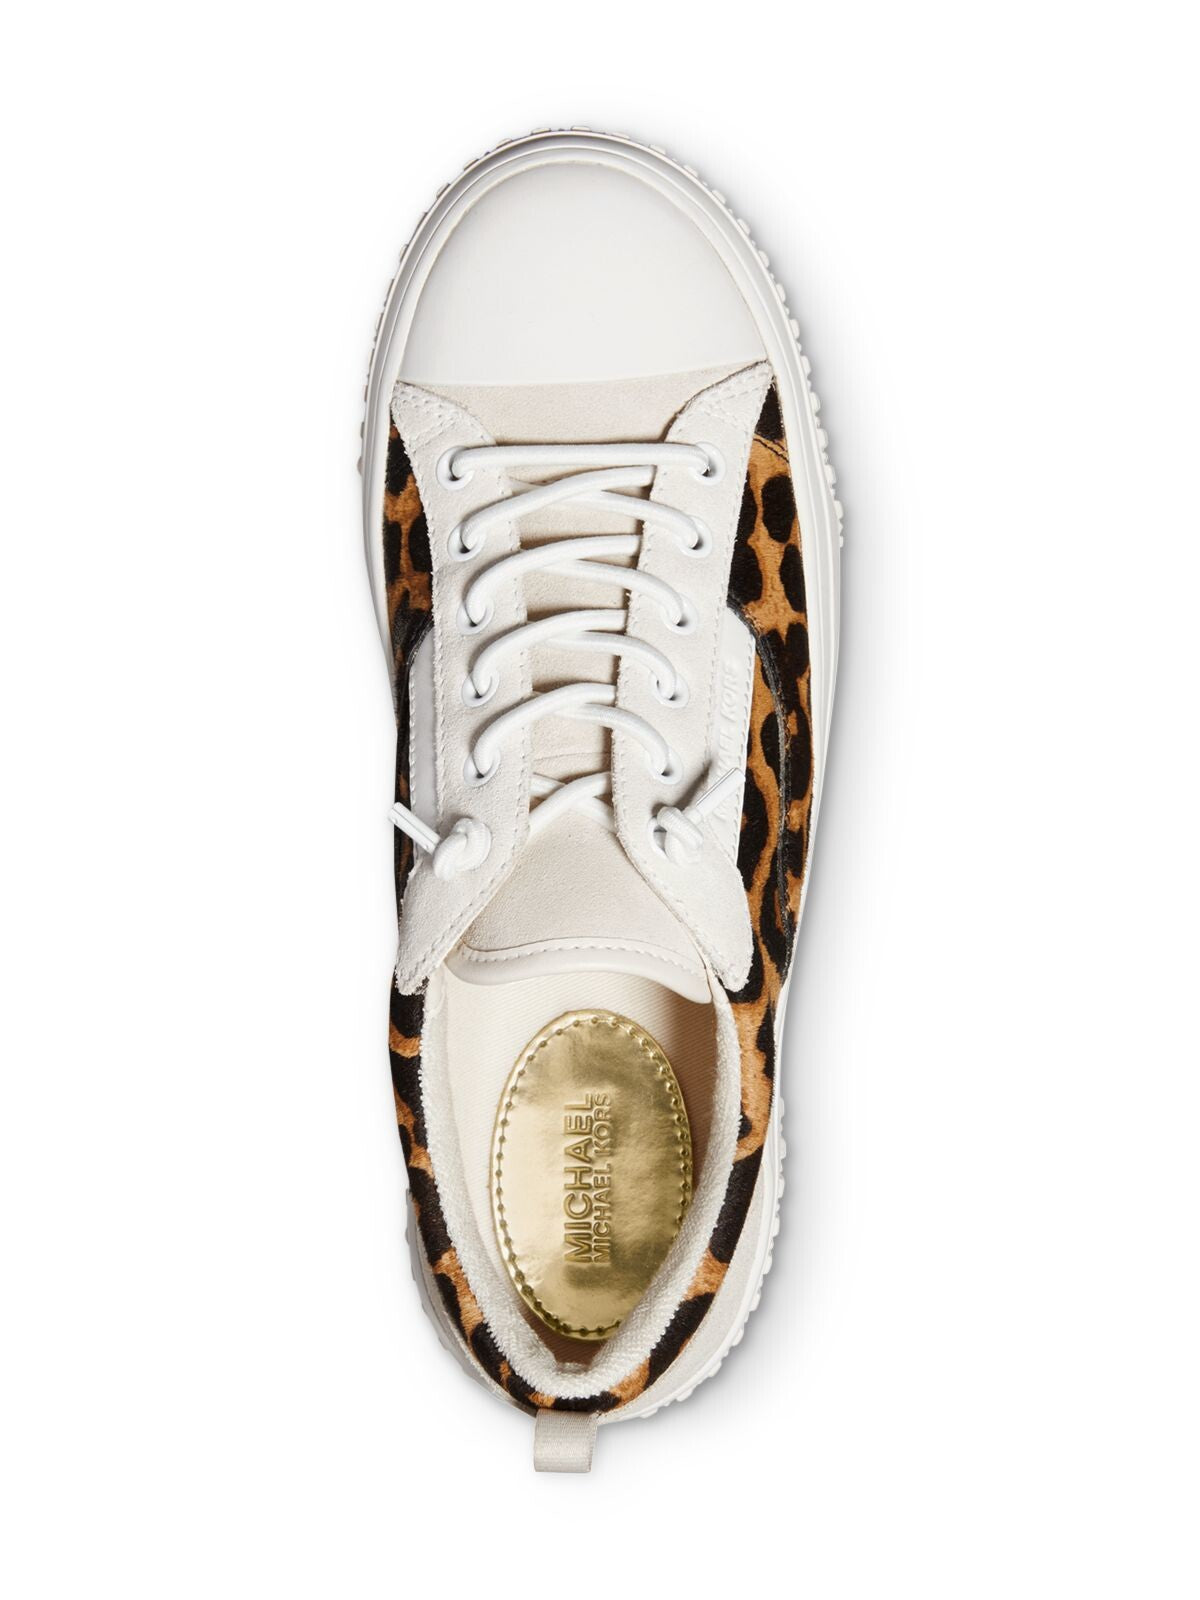 MICHAEL KORS Womens Beige Leopard Print Removable Insole Pull Tab Logo Oscar Round Toe Platform Lace-Up Leather Athletic Sneakers Shoes 10 M